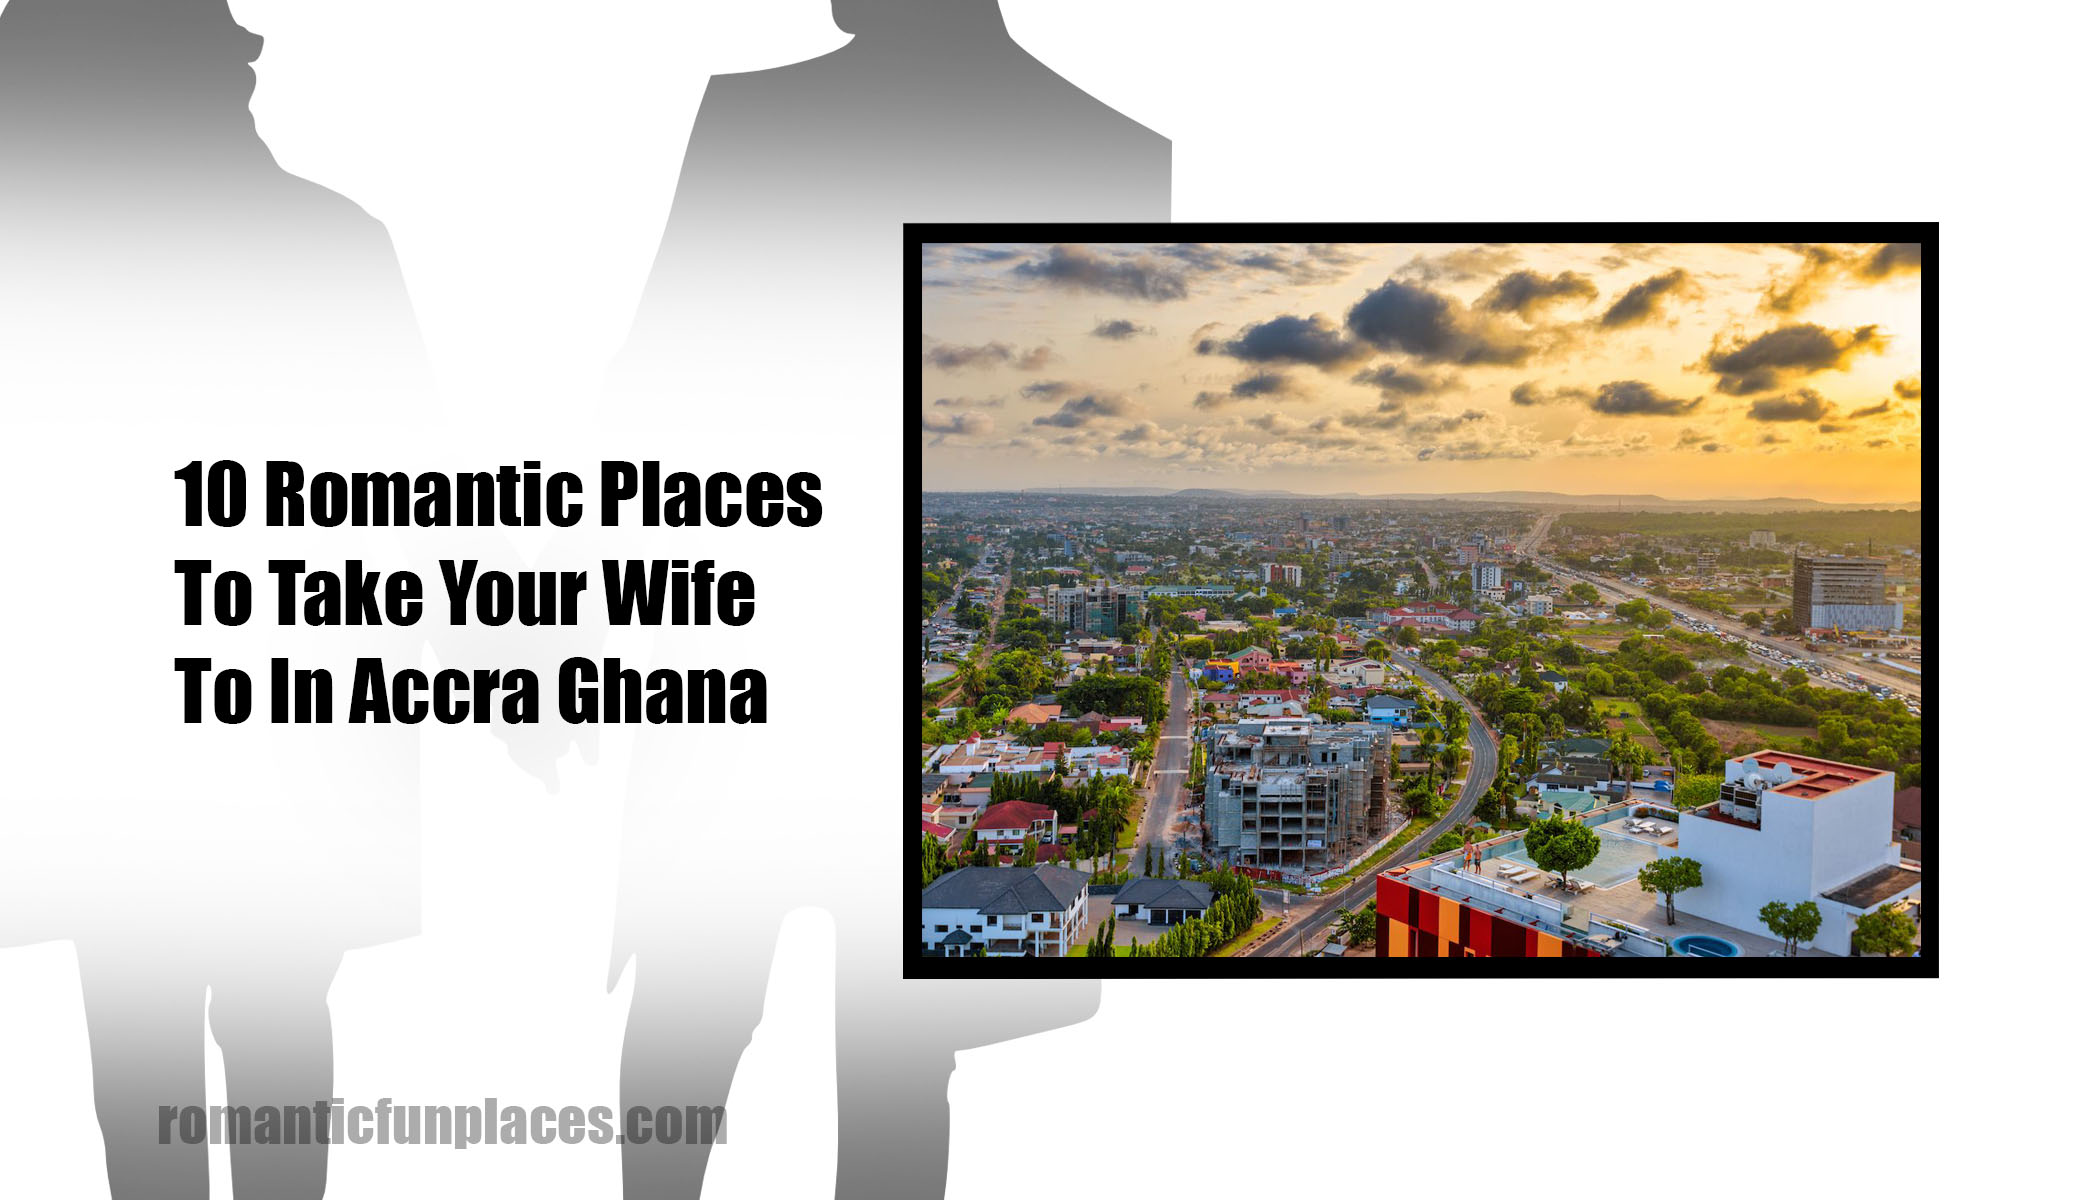 10 Romantic Places To Take Your Wife To In Accra Ghana